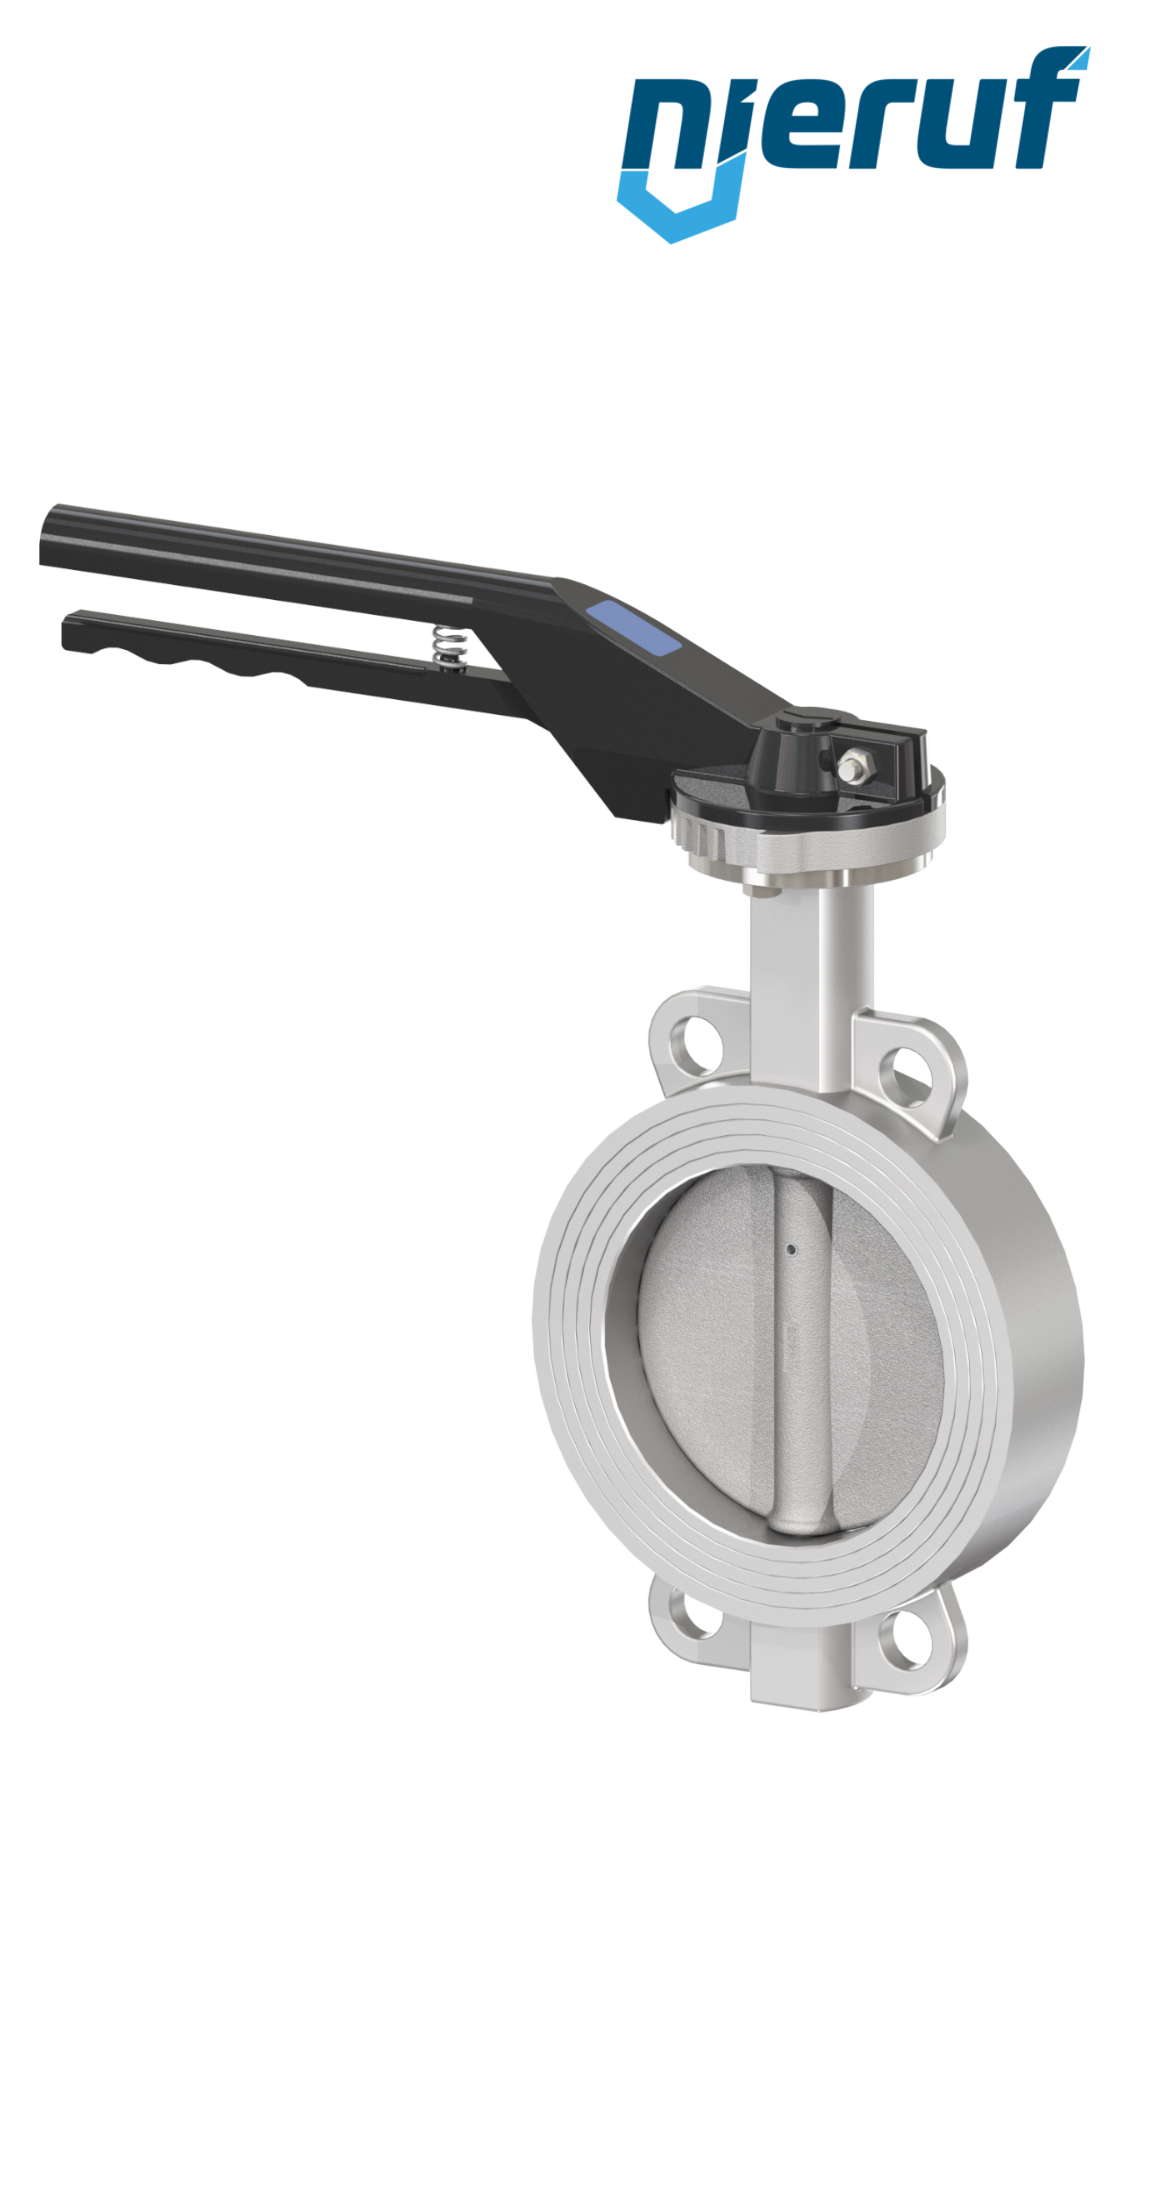 Butterfly-valve-stainless-steel DN 125 PN16 AK08 metall notch lever